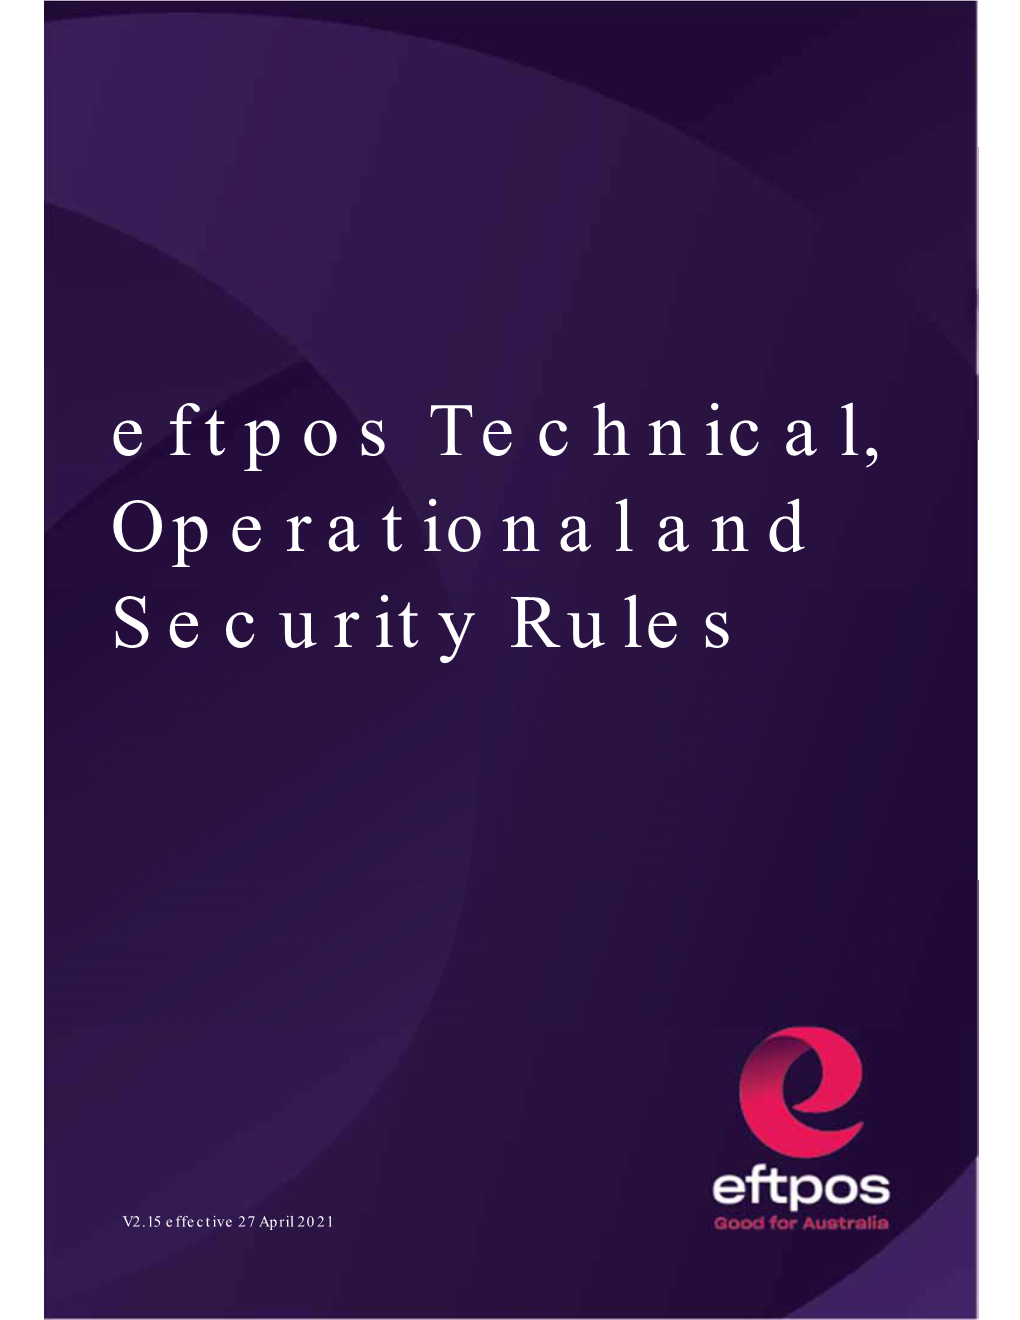 Eftpos Technical, Operational and Security Rules